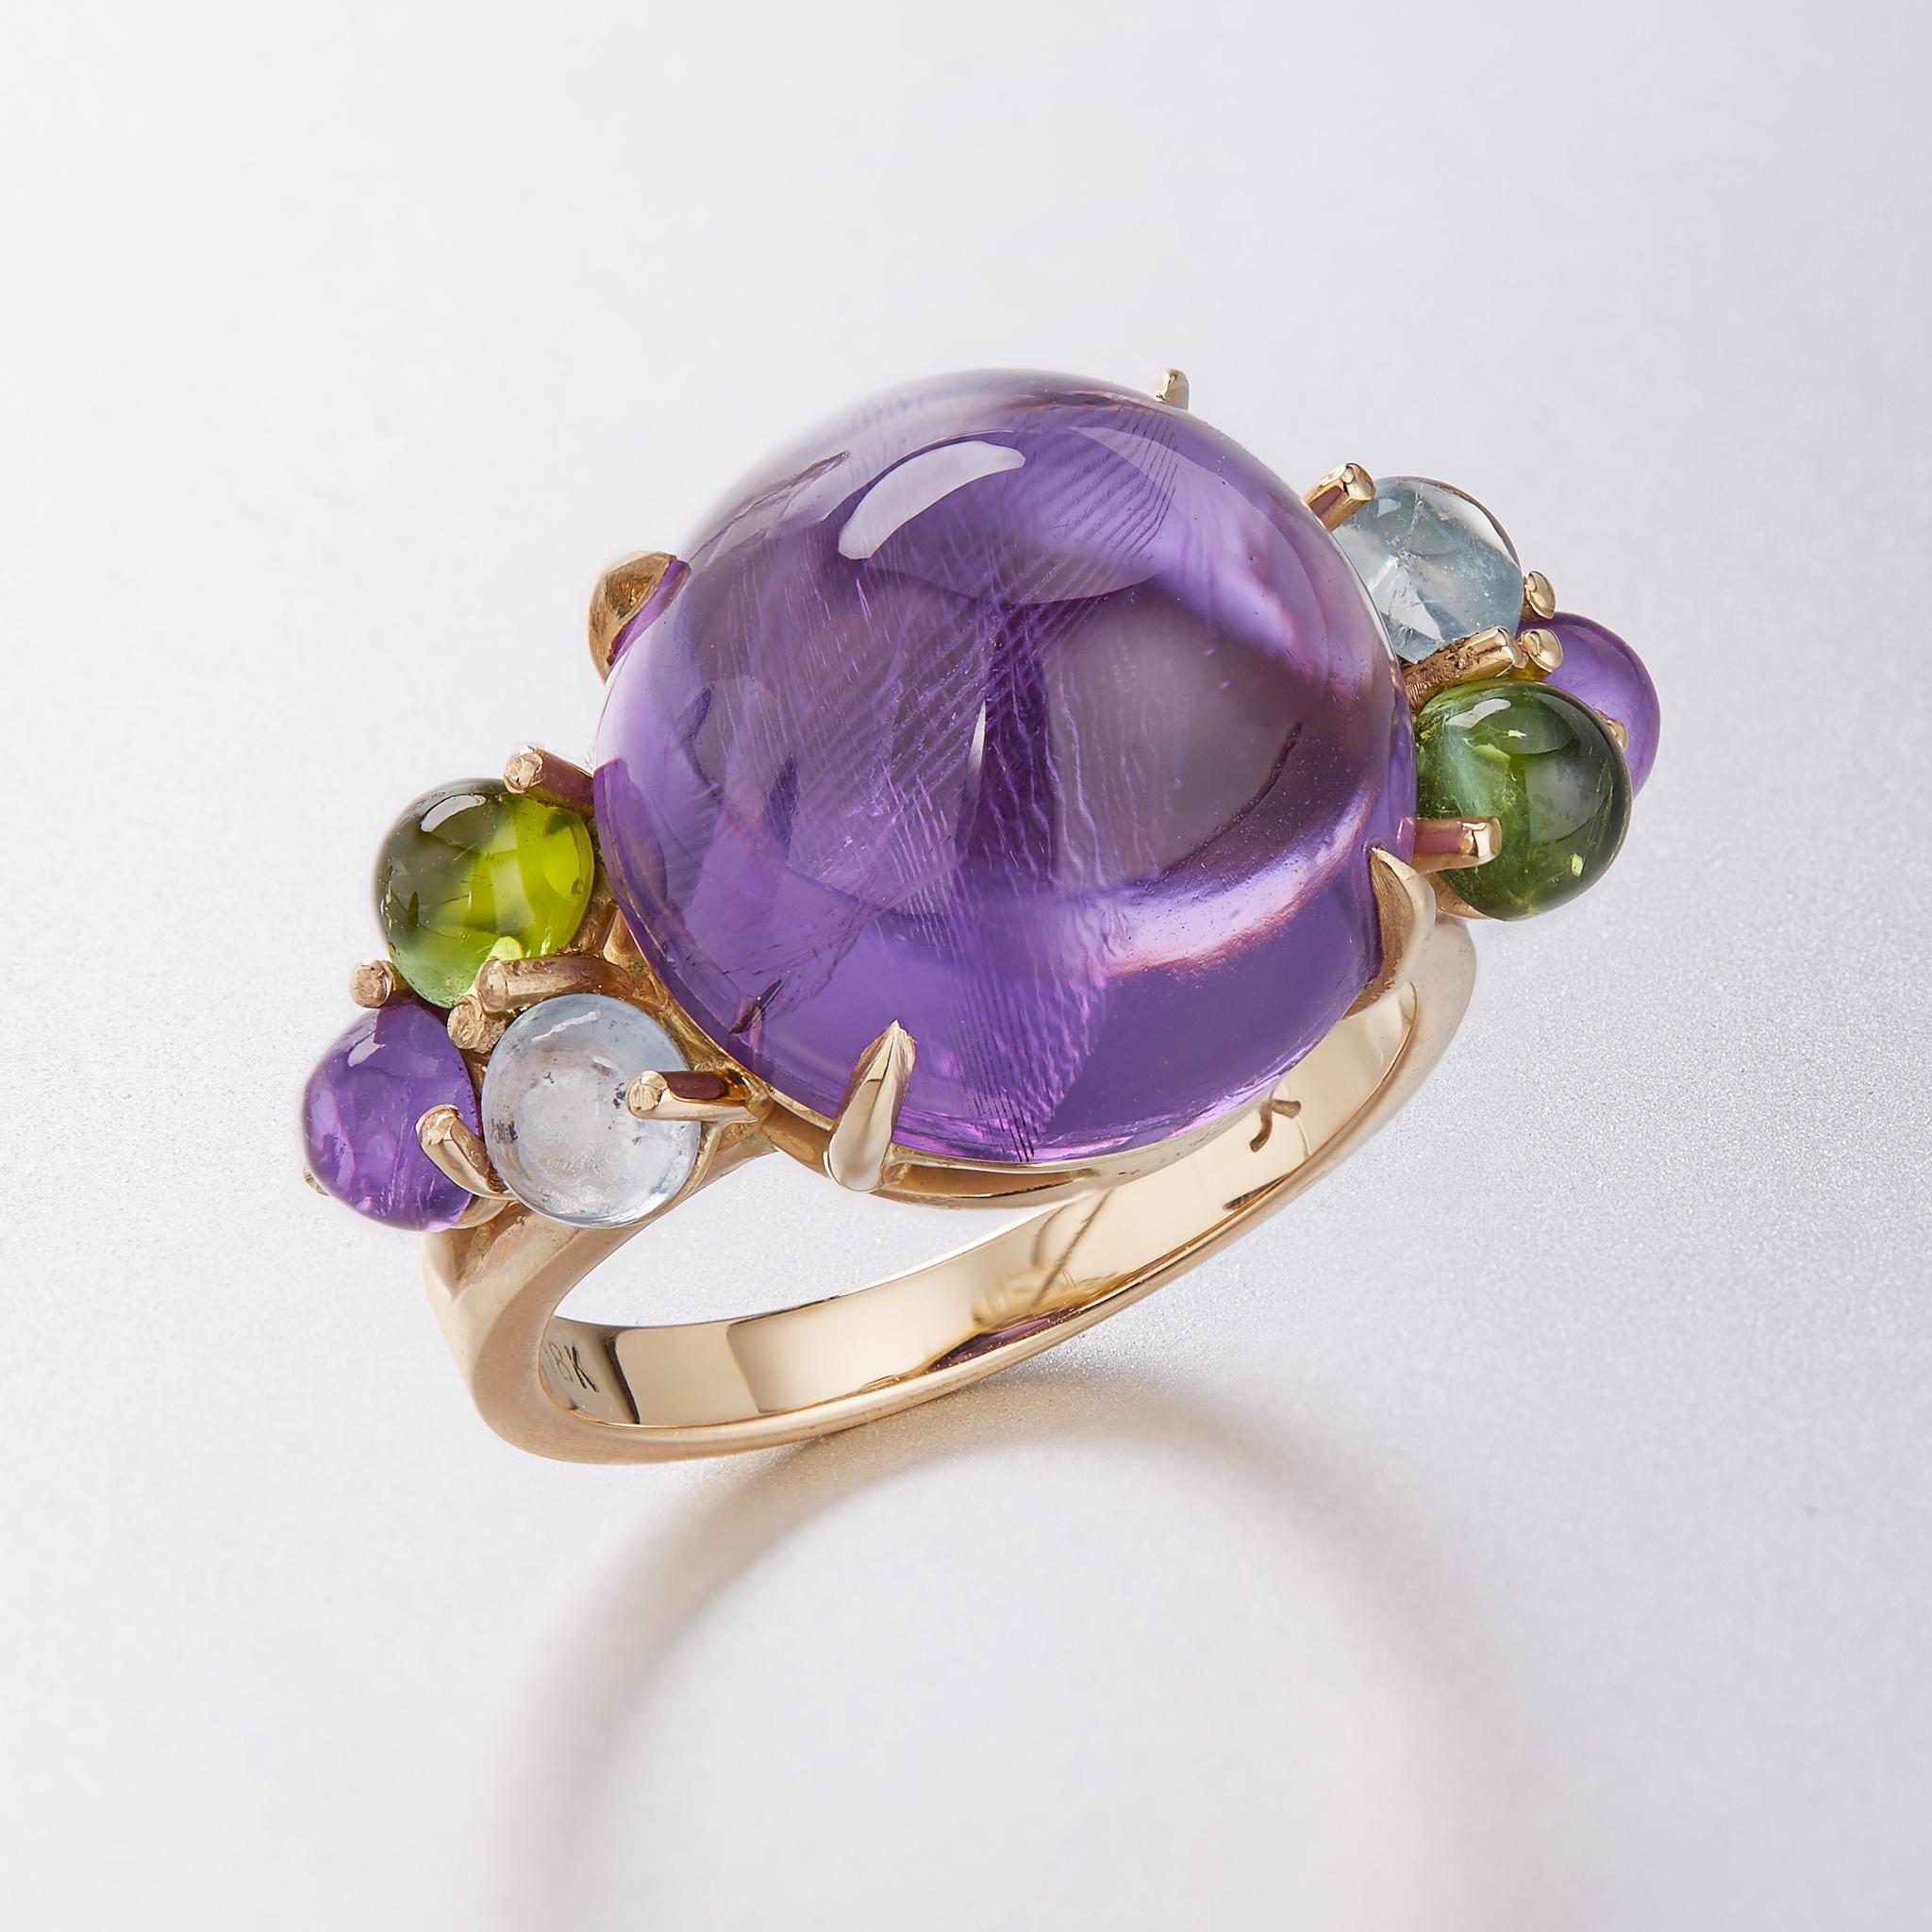 An impressive cocktail ring featuring a vibrant 14mm round cabochon amethyst center.  Complimented by a trio of gemstones on both sides with lush green tourmaline, baby blue aquamarine, and matching amethyst.

This ring can be sized to fit your